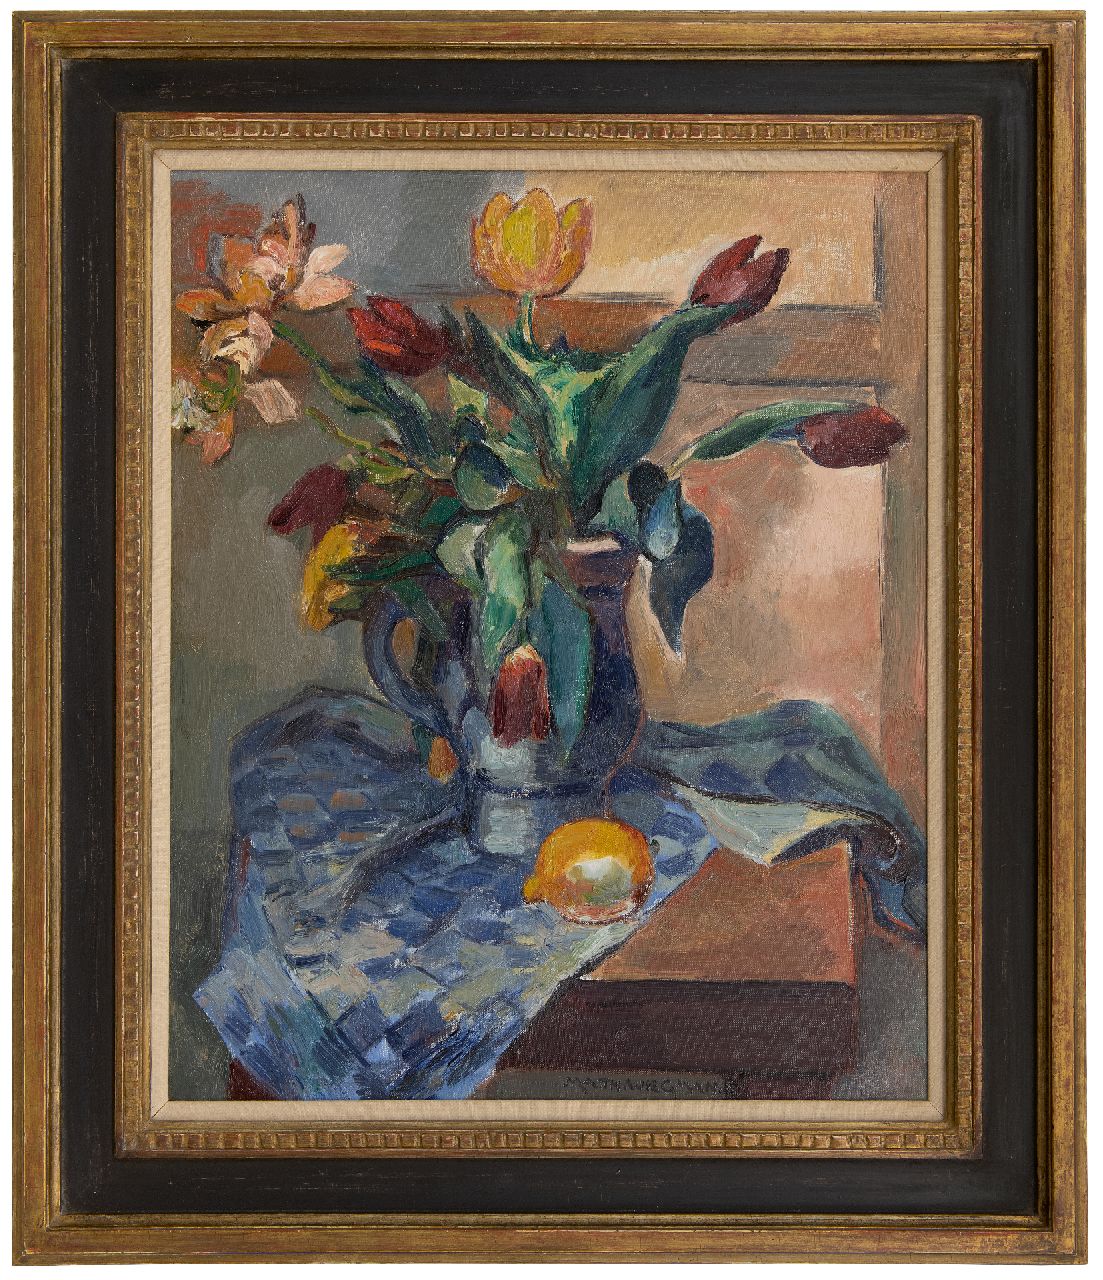 Wiegman M.J.M.  | Mattheus Johannes Marie 'Matthieu' Wiegman | Paintings offered for sale | A still life with tulips and a lemon, oil on canvas 61.4 x 50.1 cm, signed l.c.